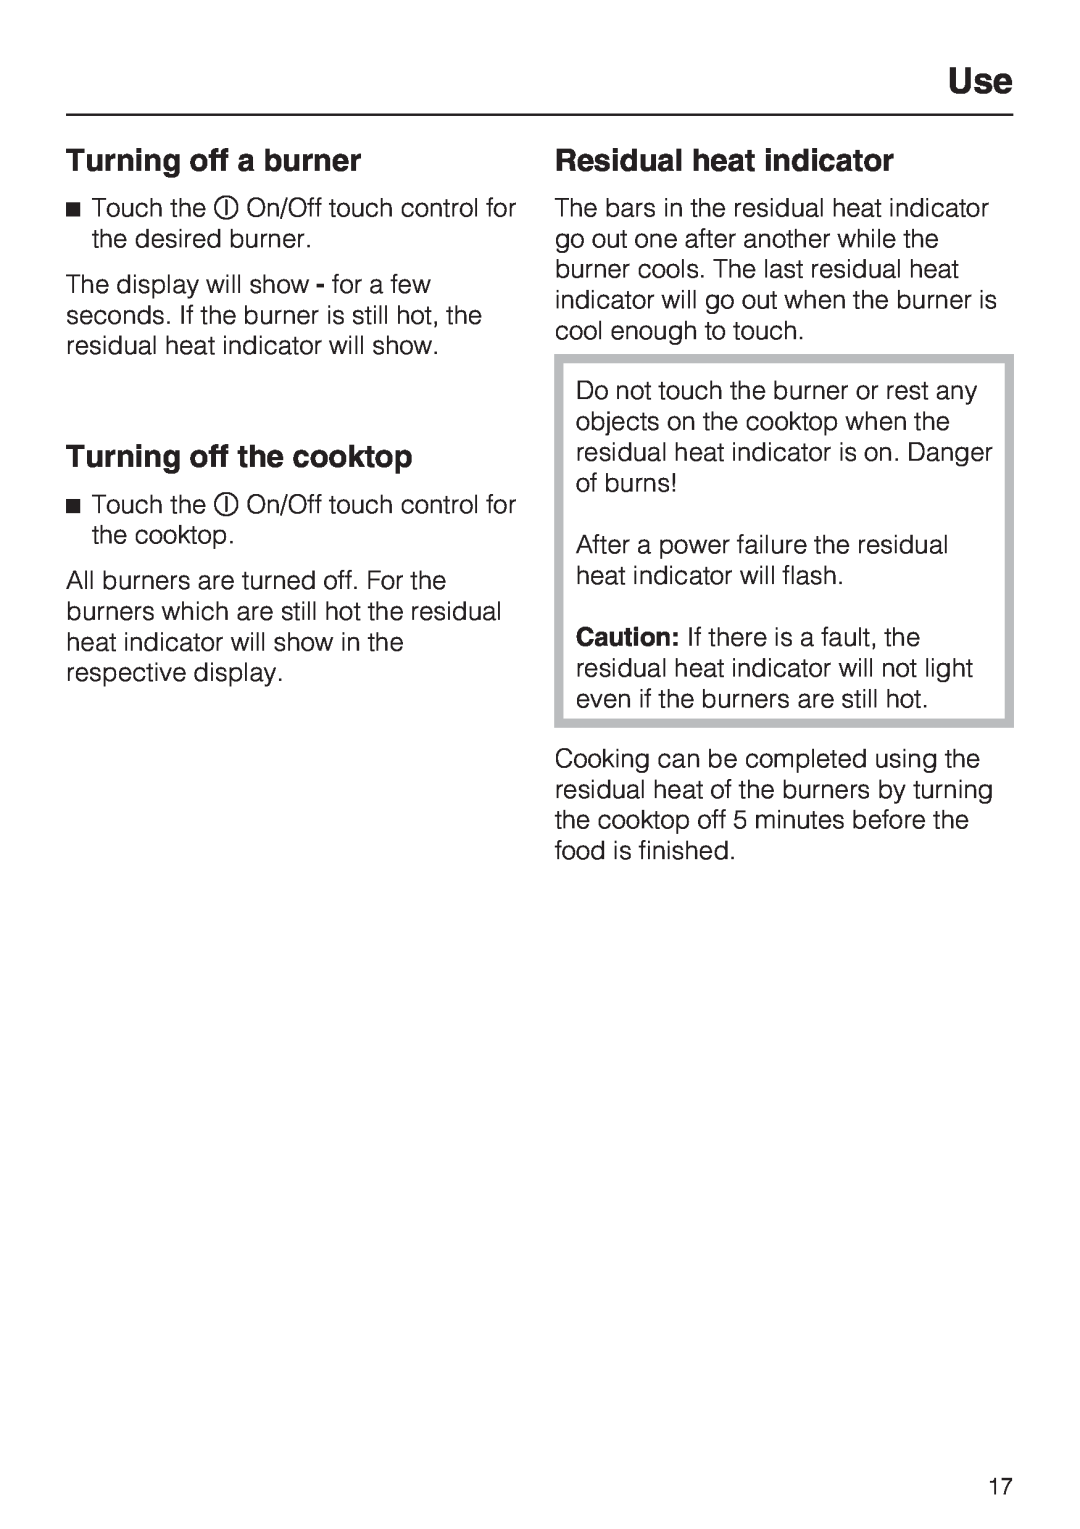 Miele KM5676 installation instructions Turning off a burner, Turning off the cooktop, Residual heat indicator 